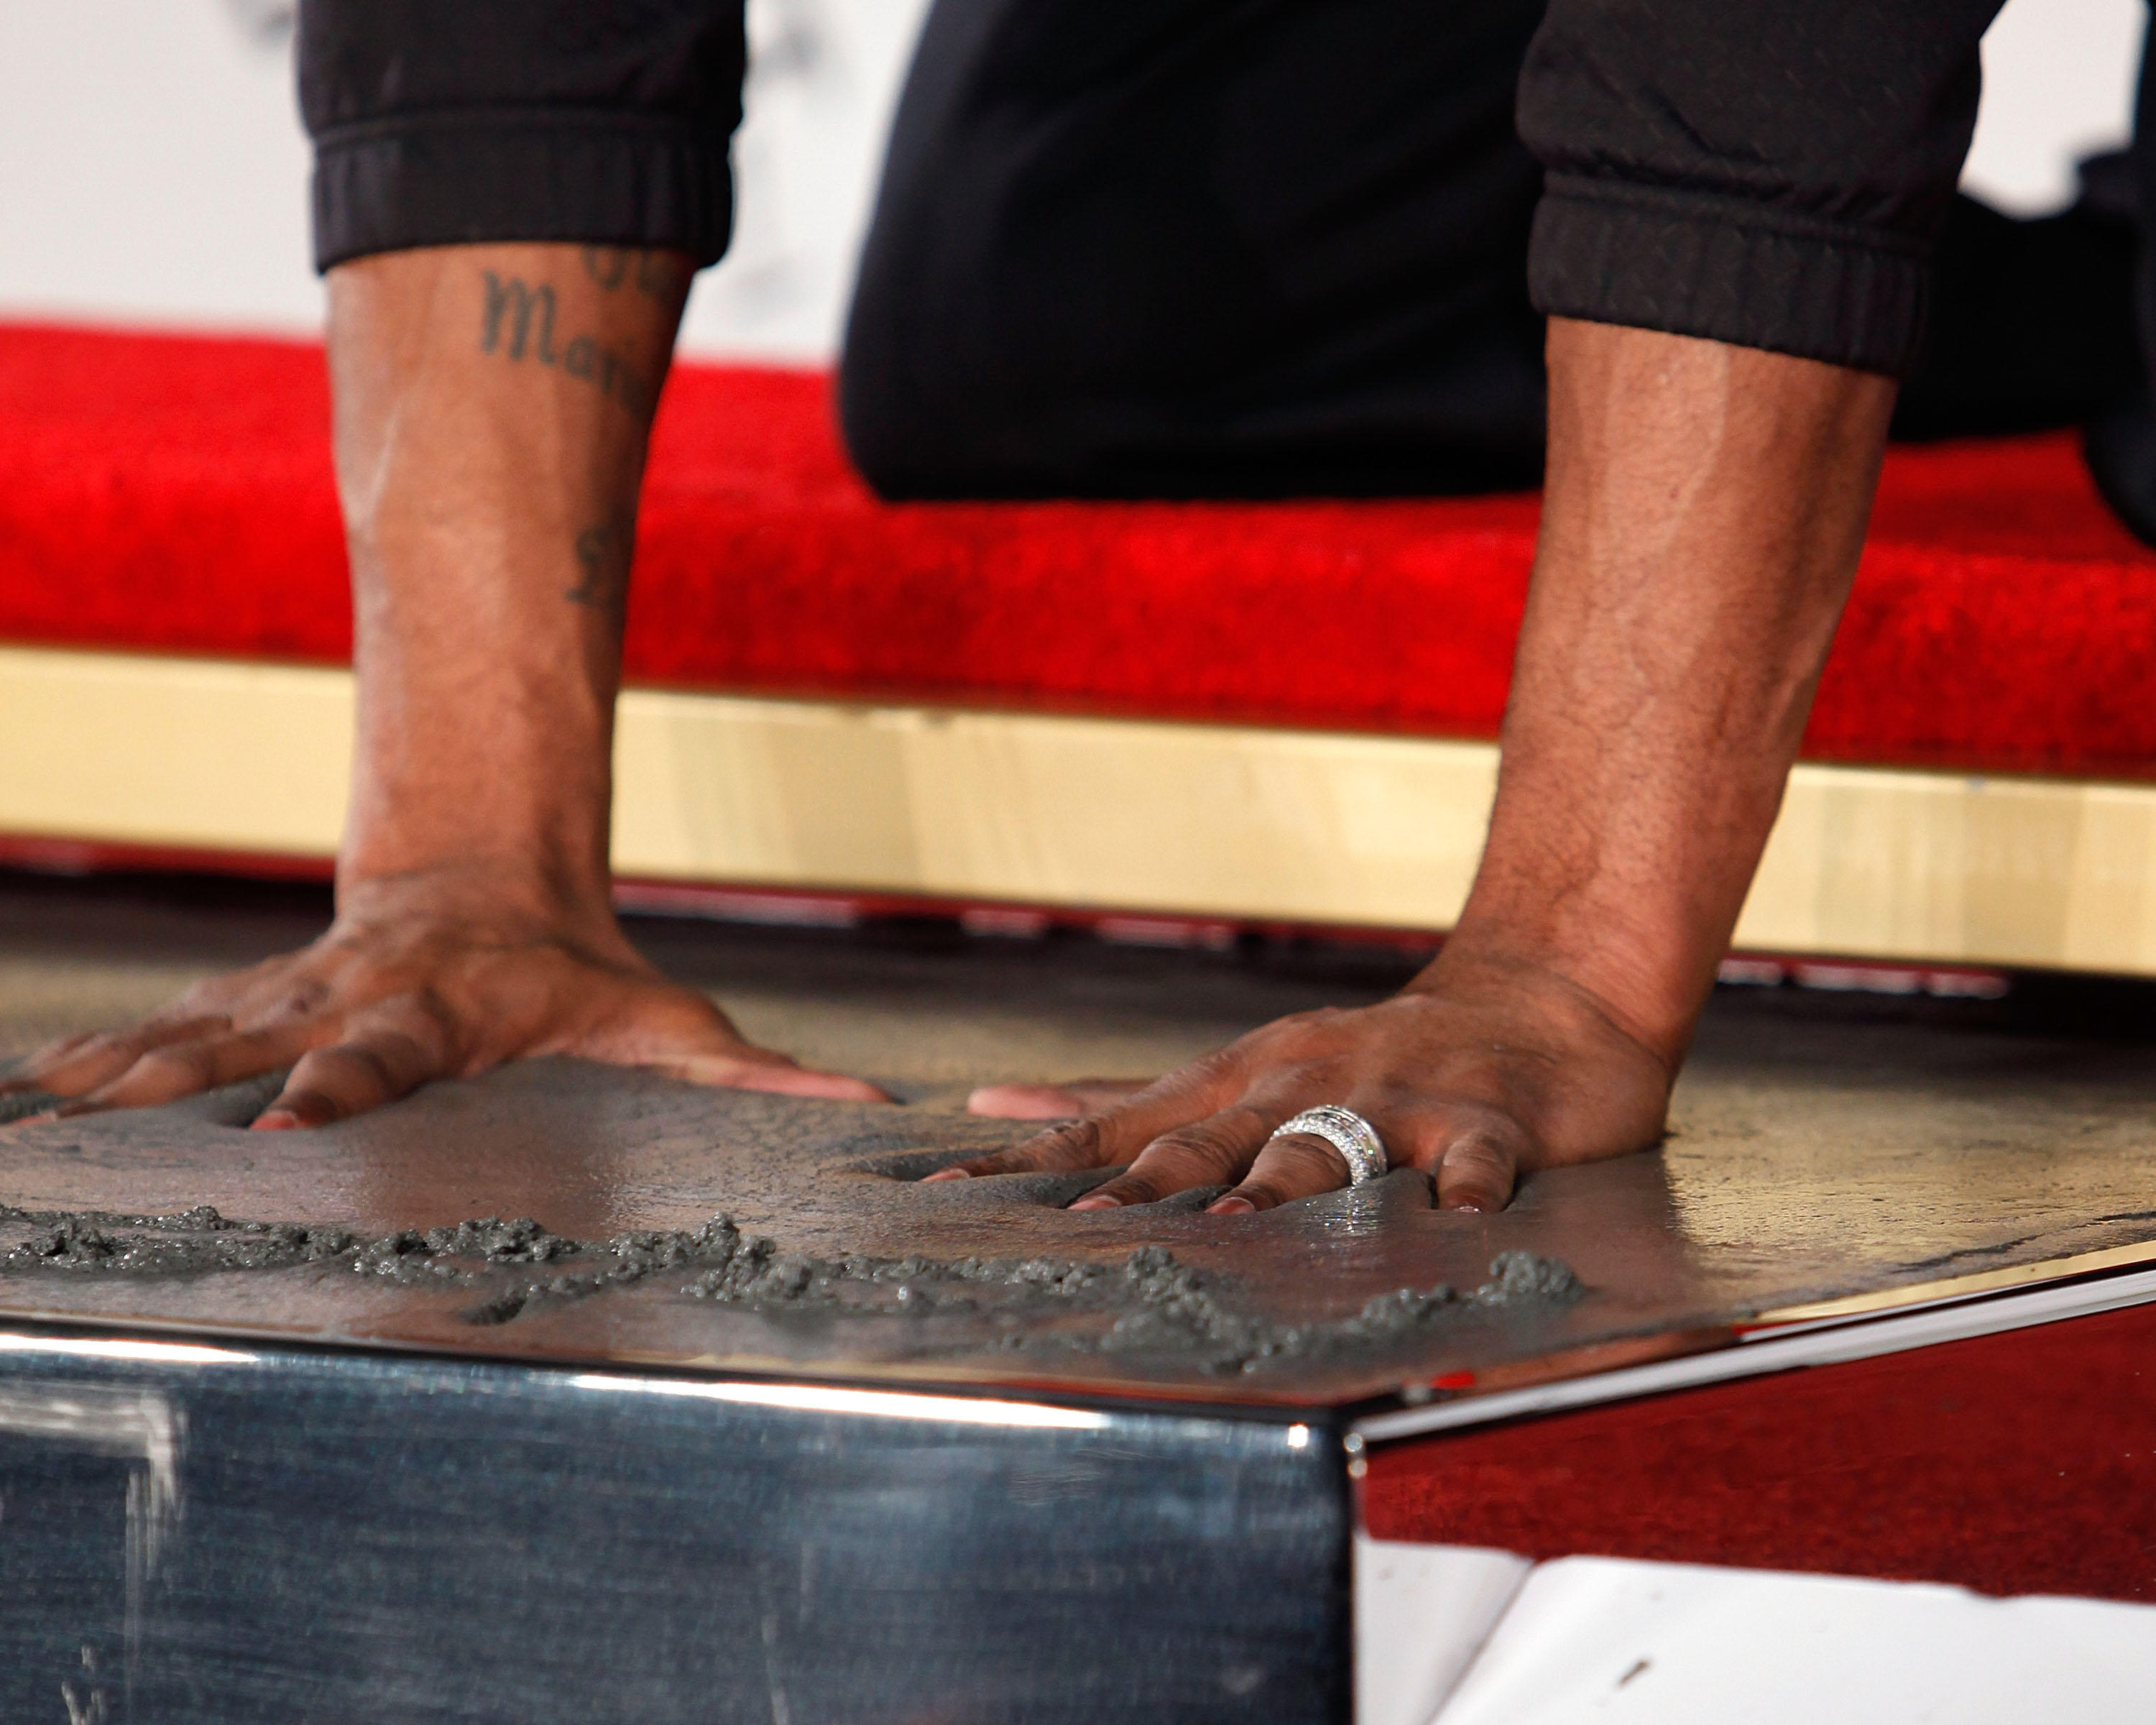 Kobe Bryant Hand and Foot Print Ceremony at The Chinese Theatre In